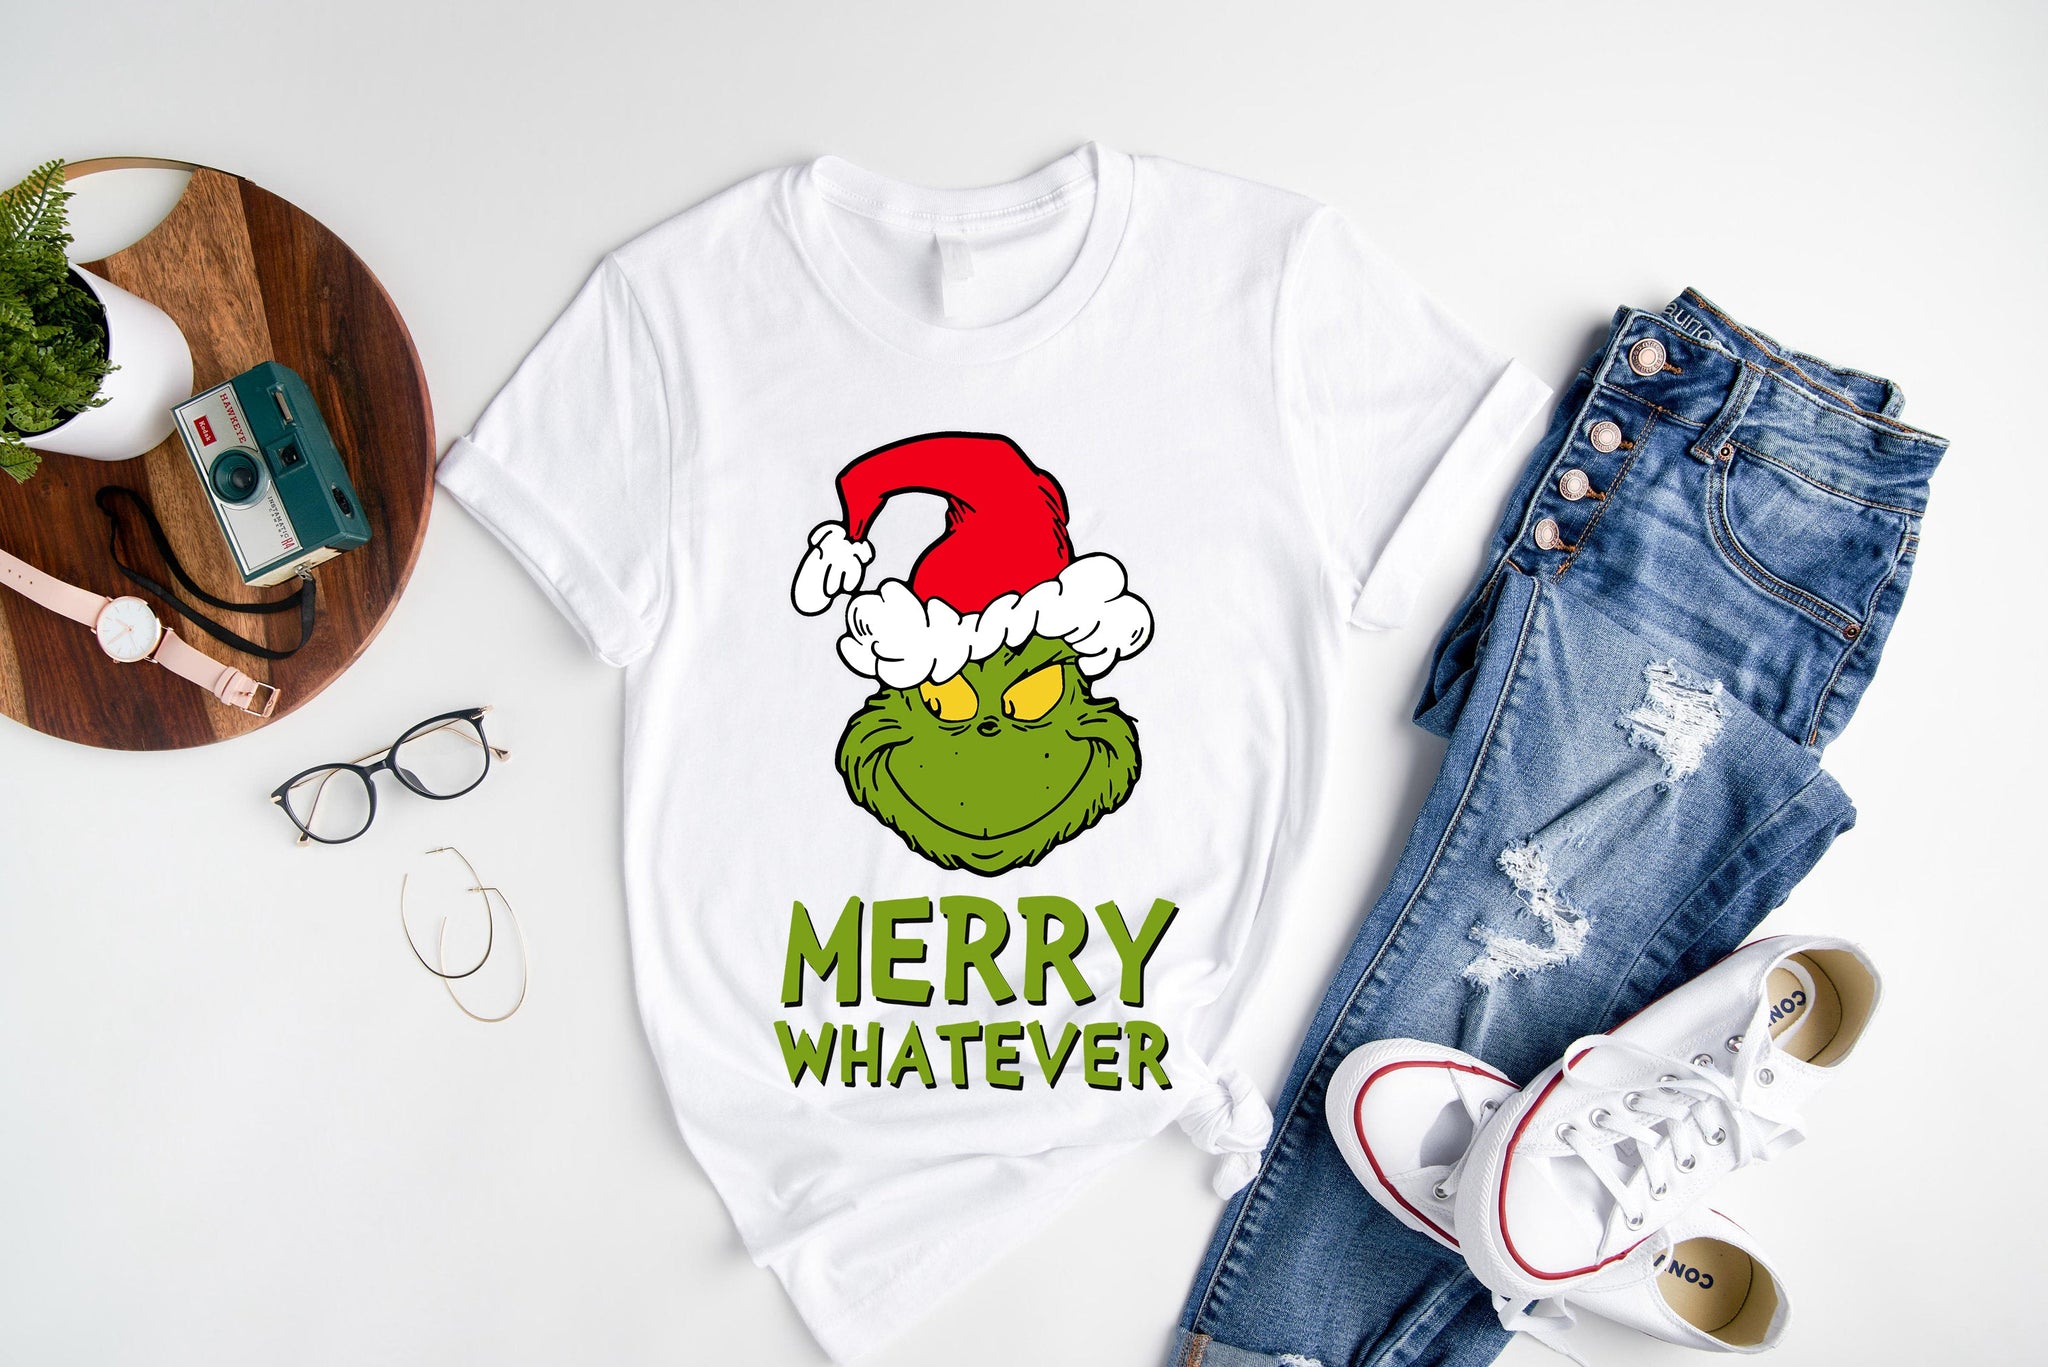 Family Christmas Matching Pajamas Tops 'Merry Whatever' Letter Print Casual White Color Short Sleeve T-shirts  And Dog Bandana